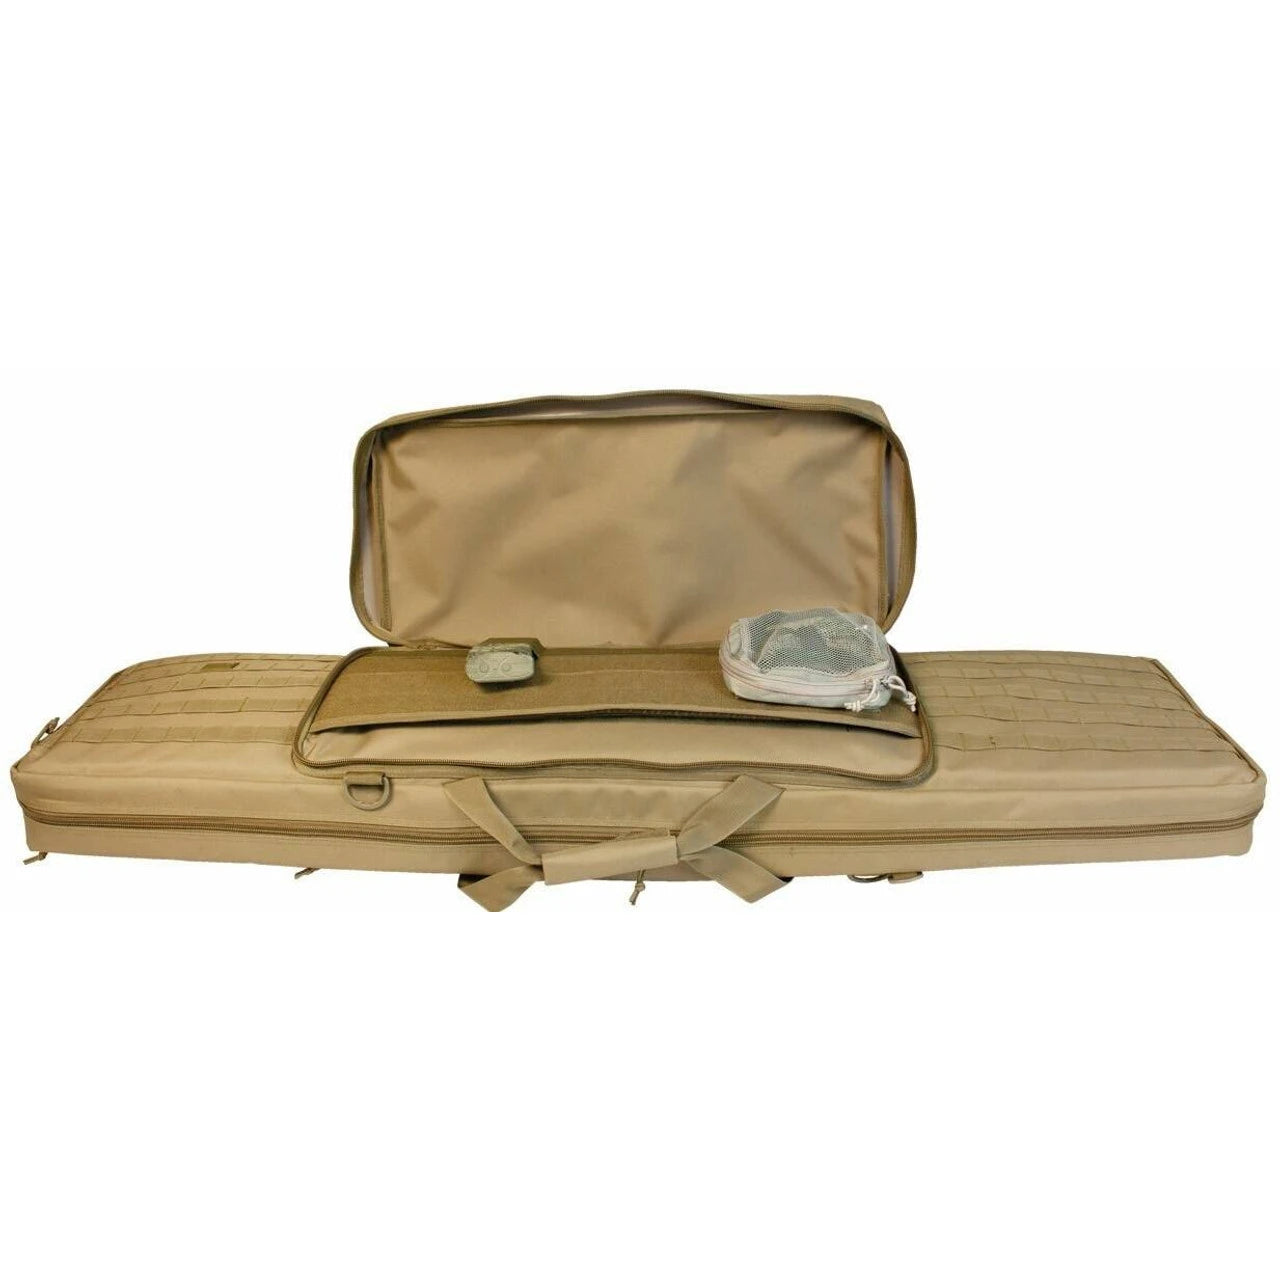 Red Rock | 52" Double Rifle Case